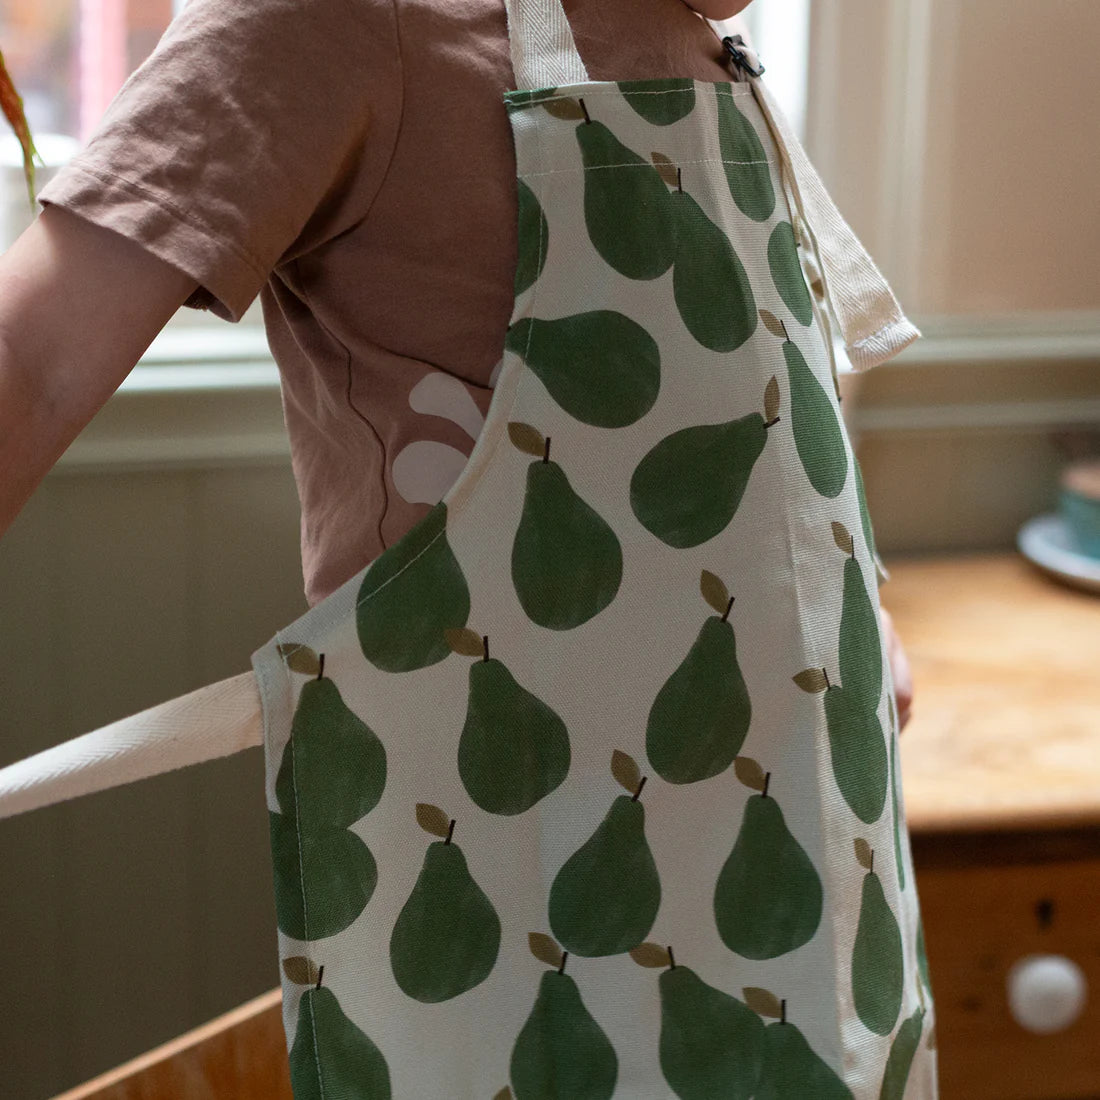 Close up photo -- Children sized apron with green pear print all over.